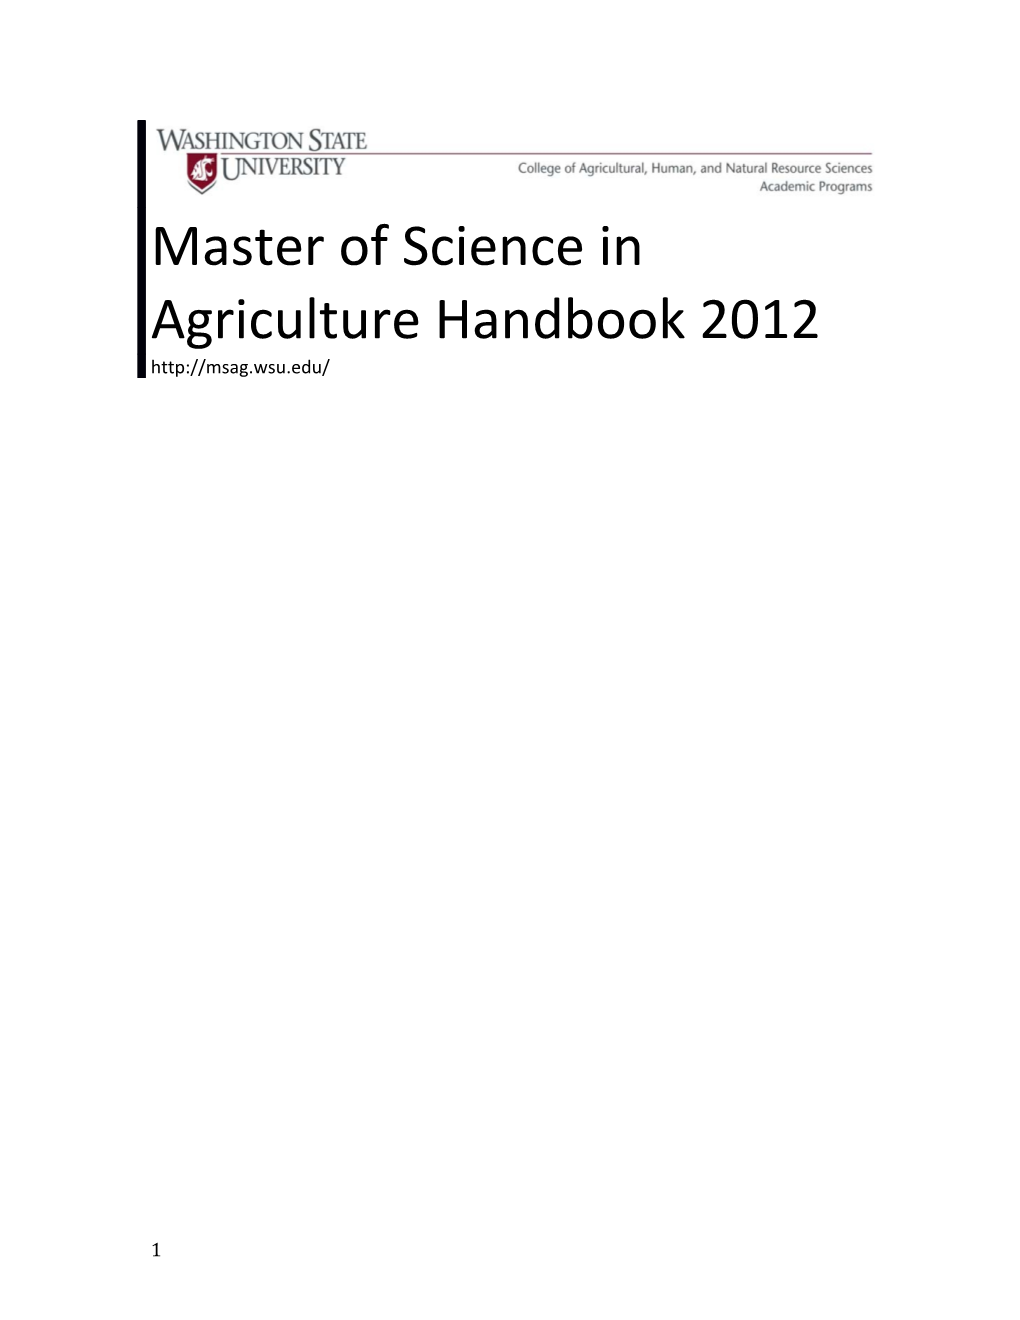 Master of Science in Agriculture Handbook 2011